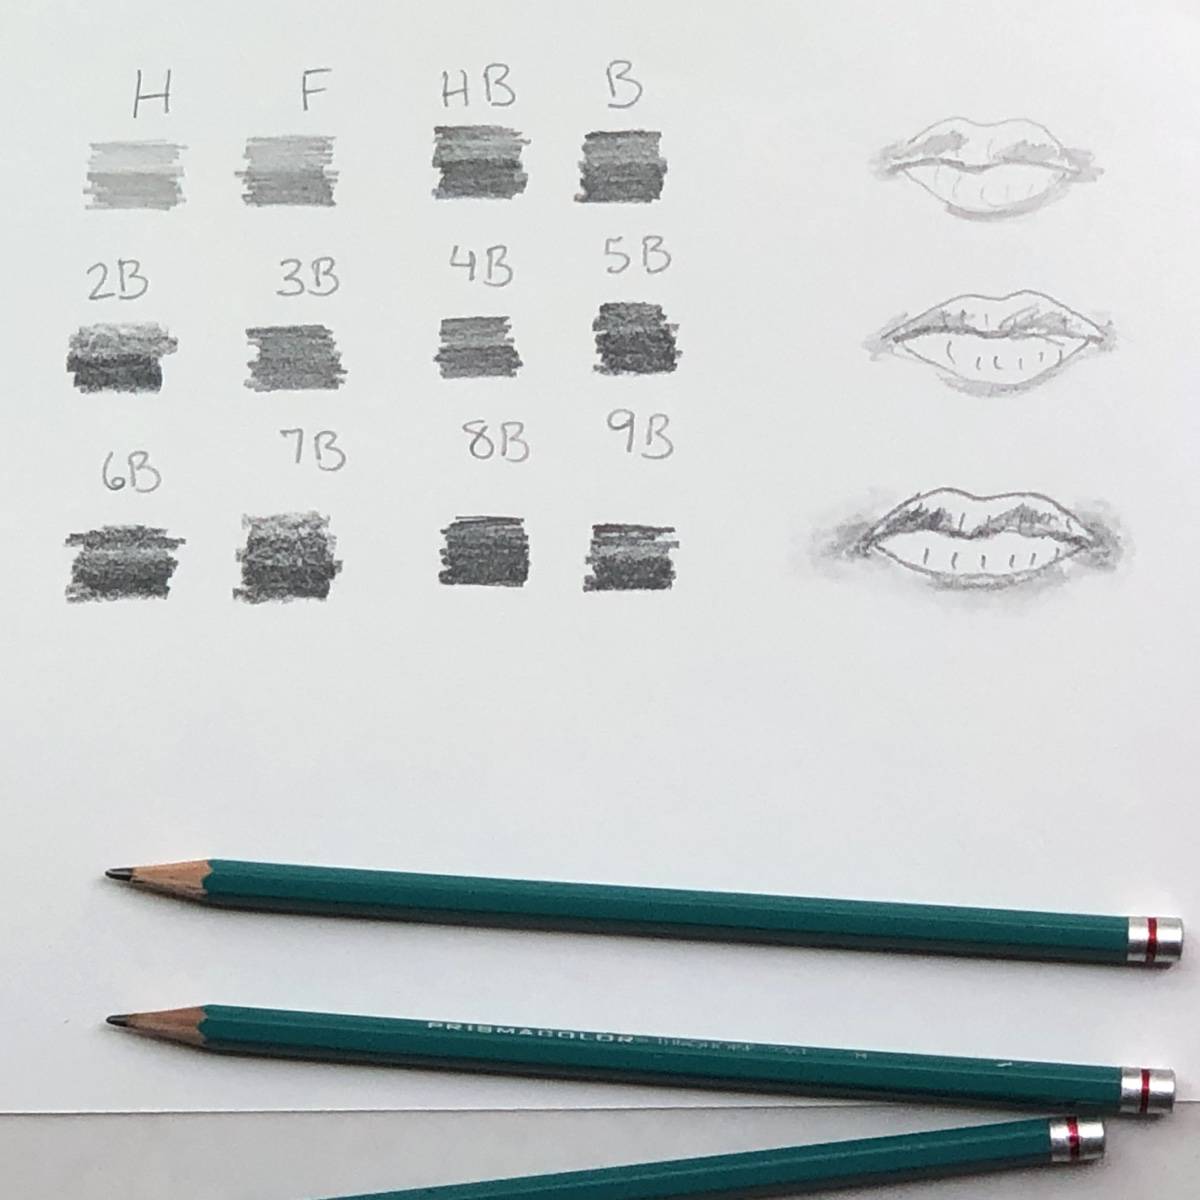 56 Best Eyes Drawing to Learn How to Draw Eyes - atinydreamer